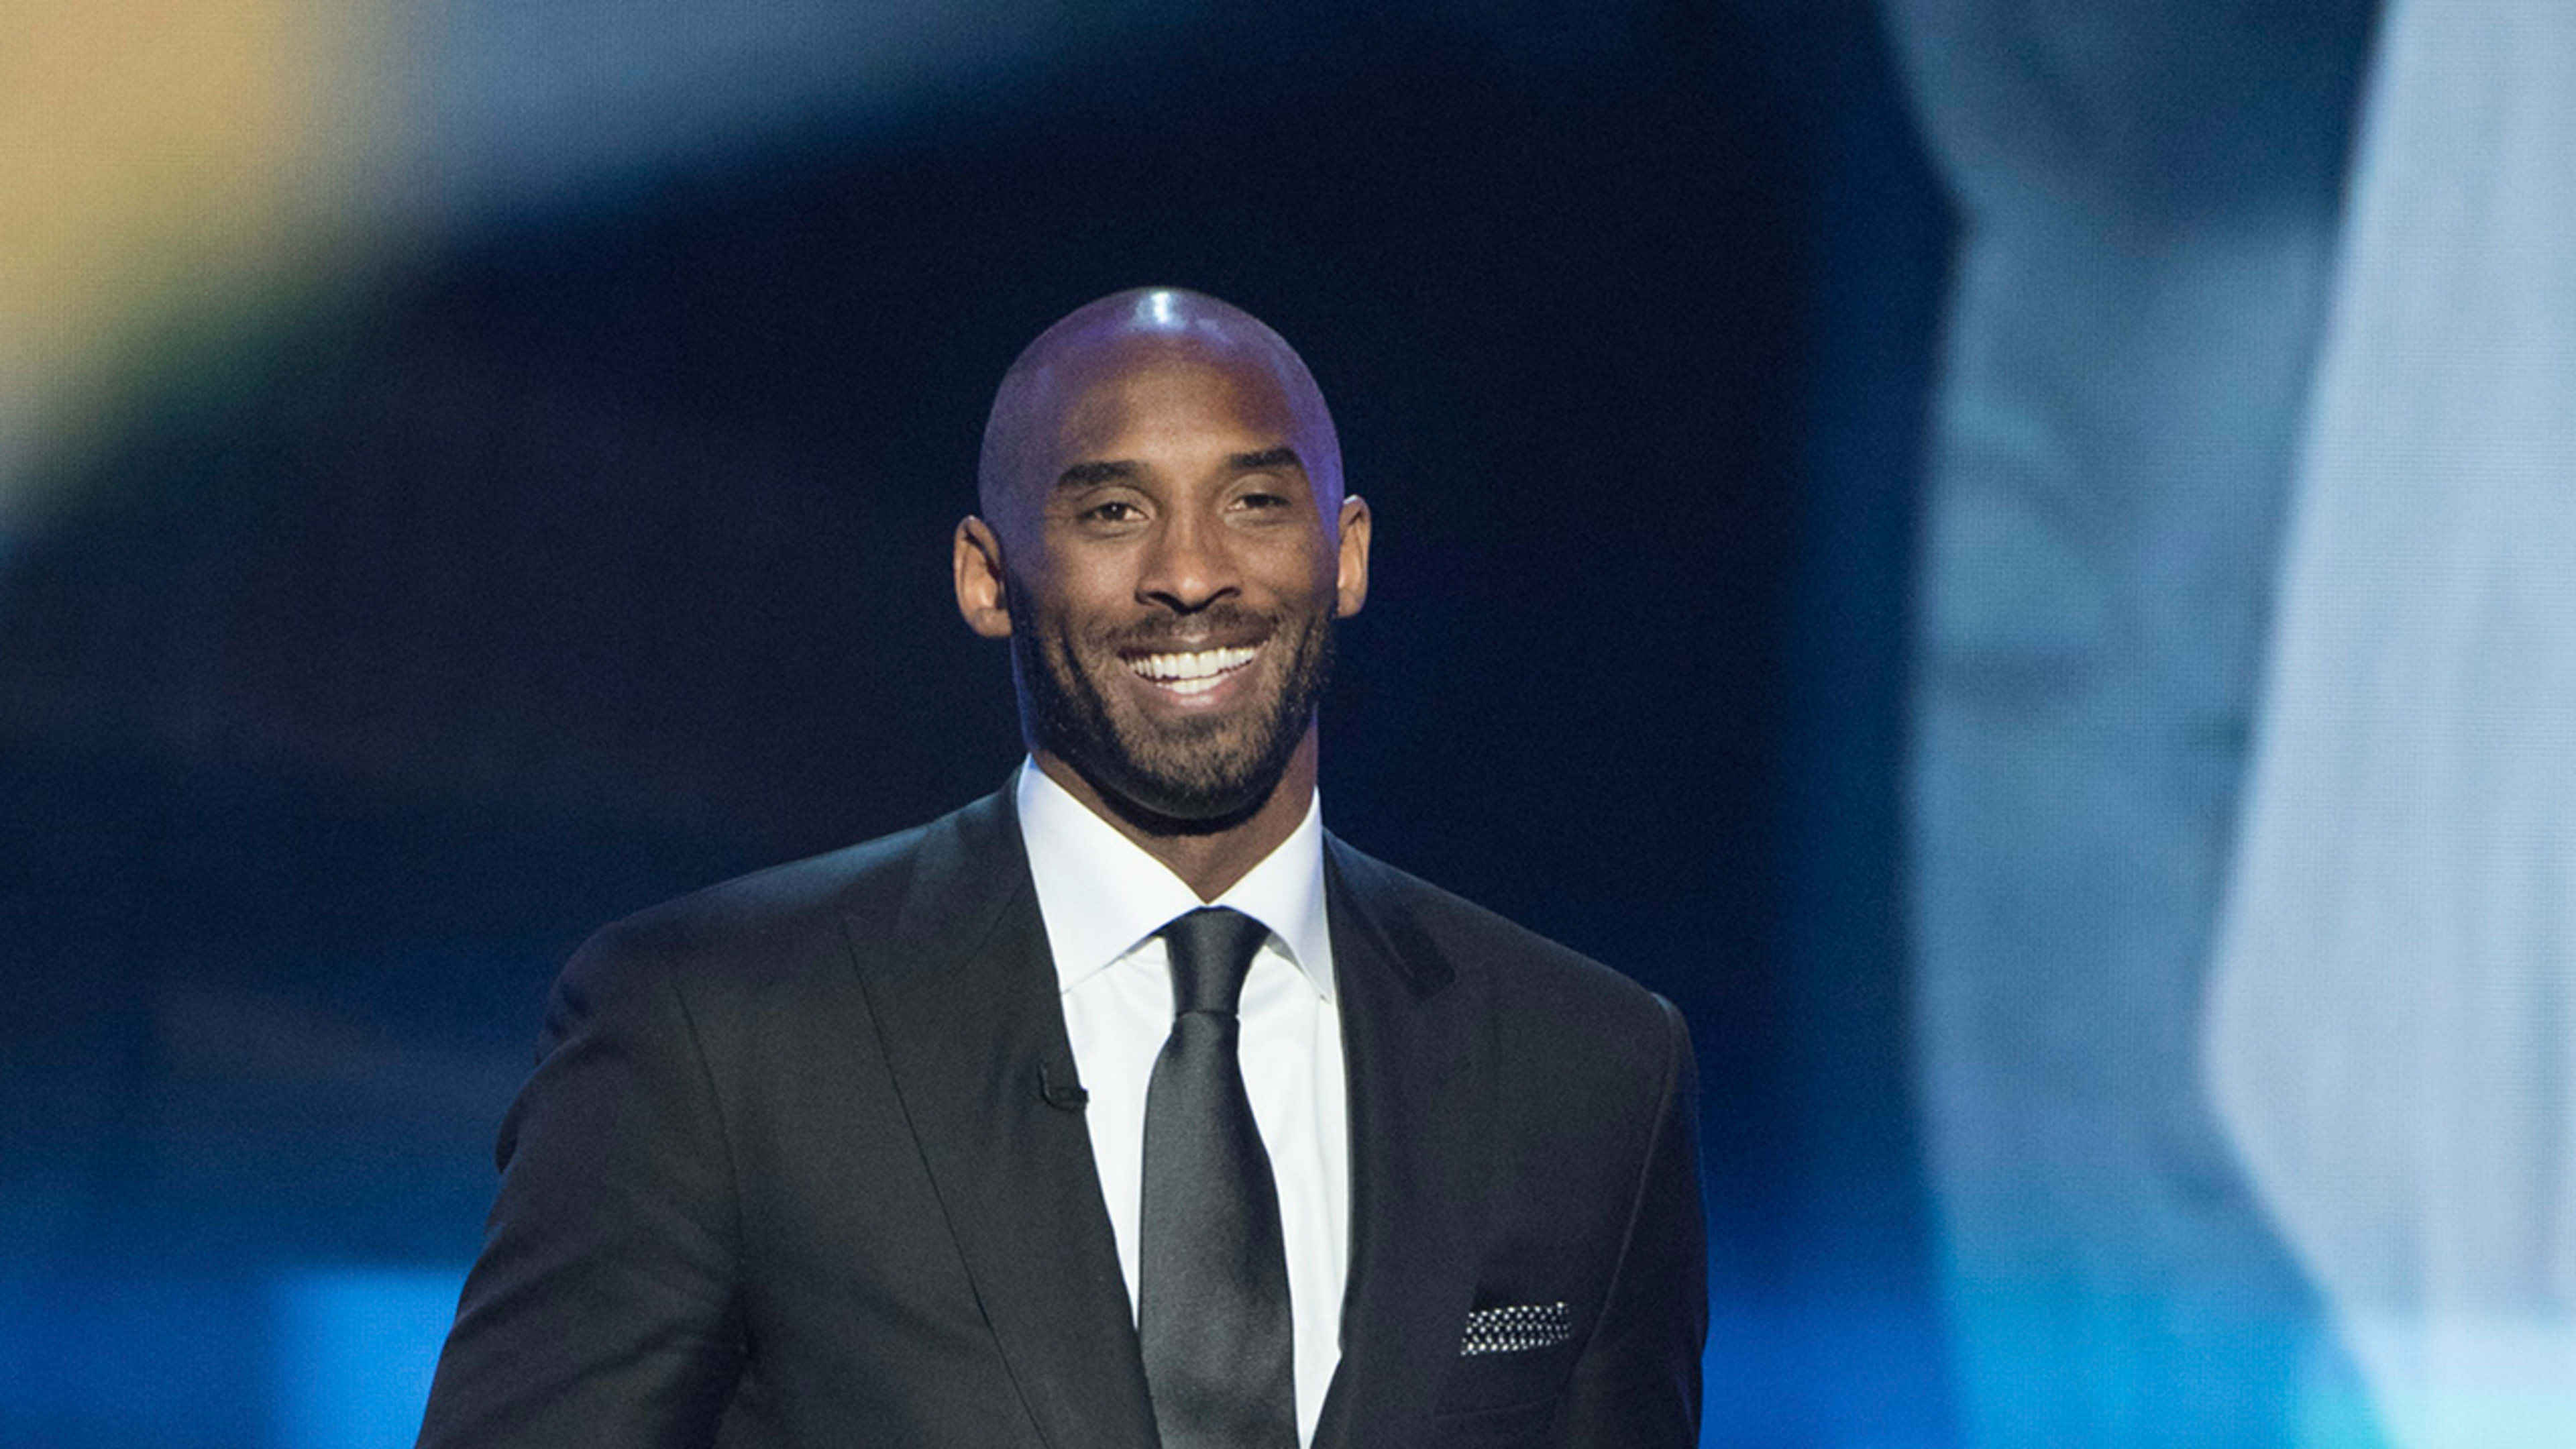 UPDATE: Kobe Bryant Just Won An Oscar At The #MeToo Academy Awards